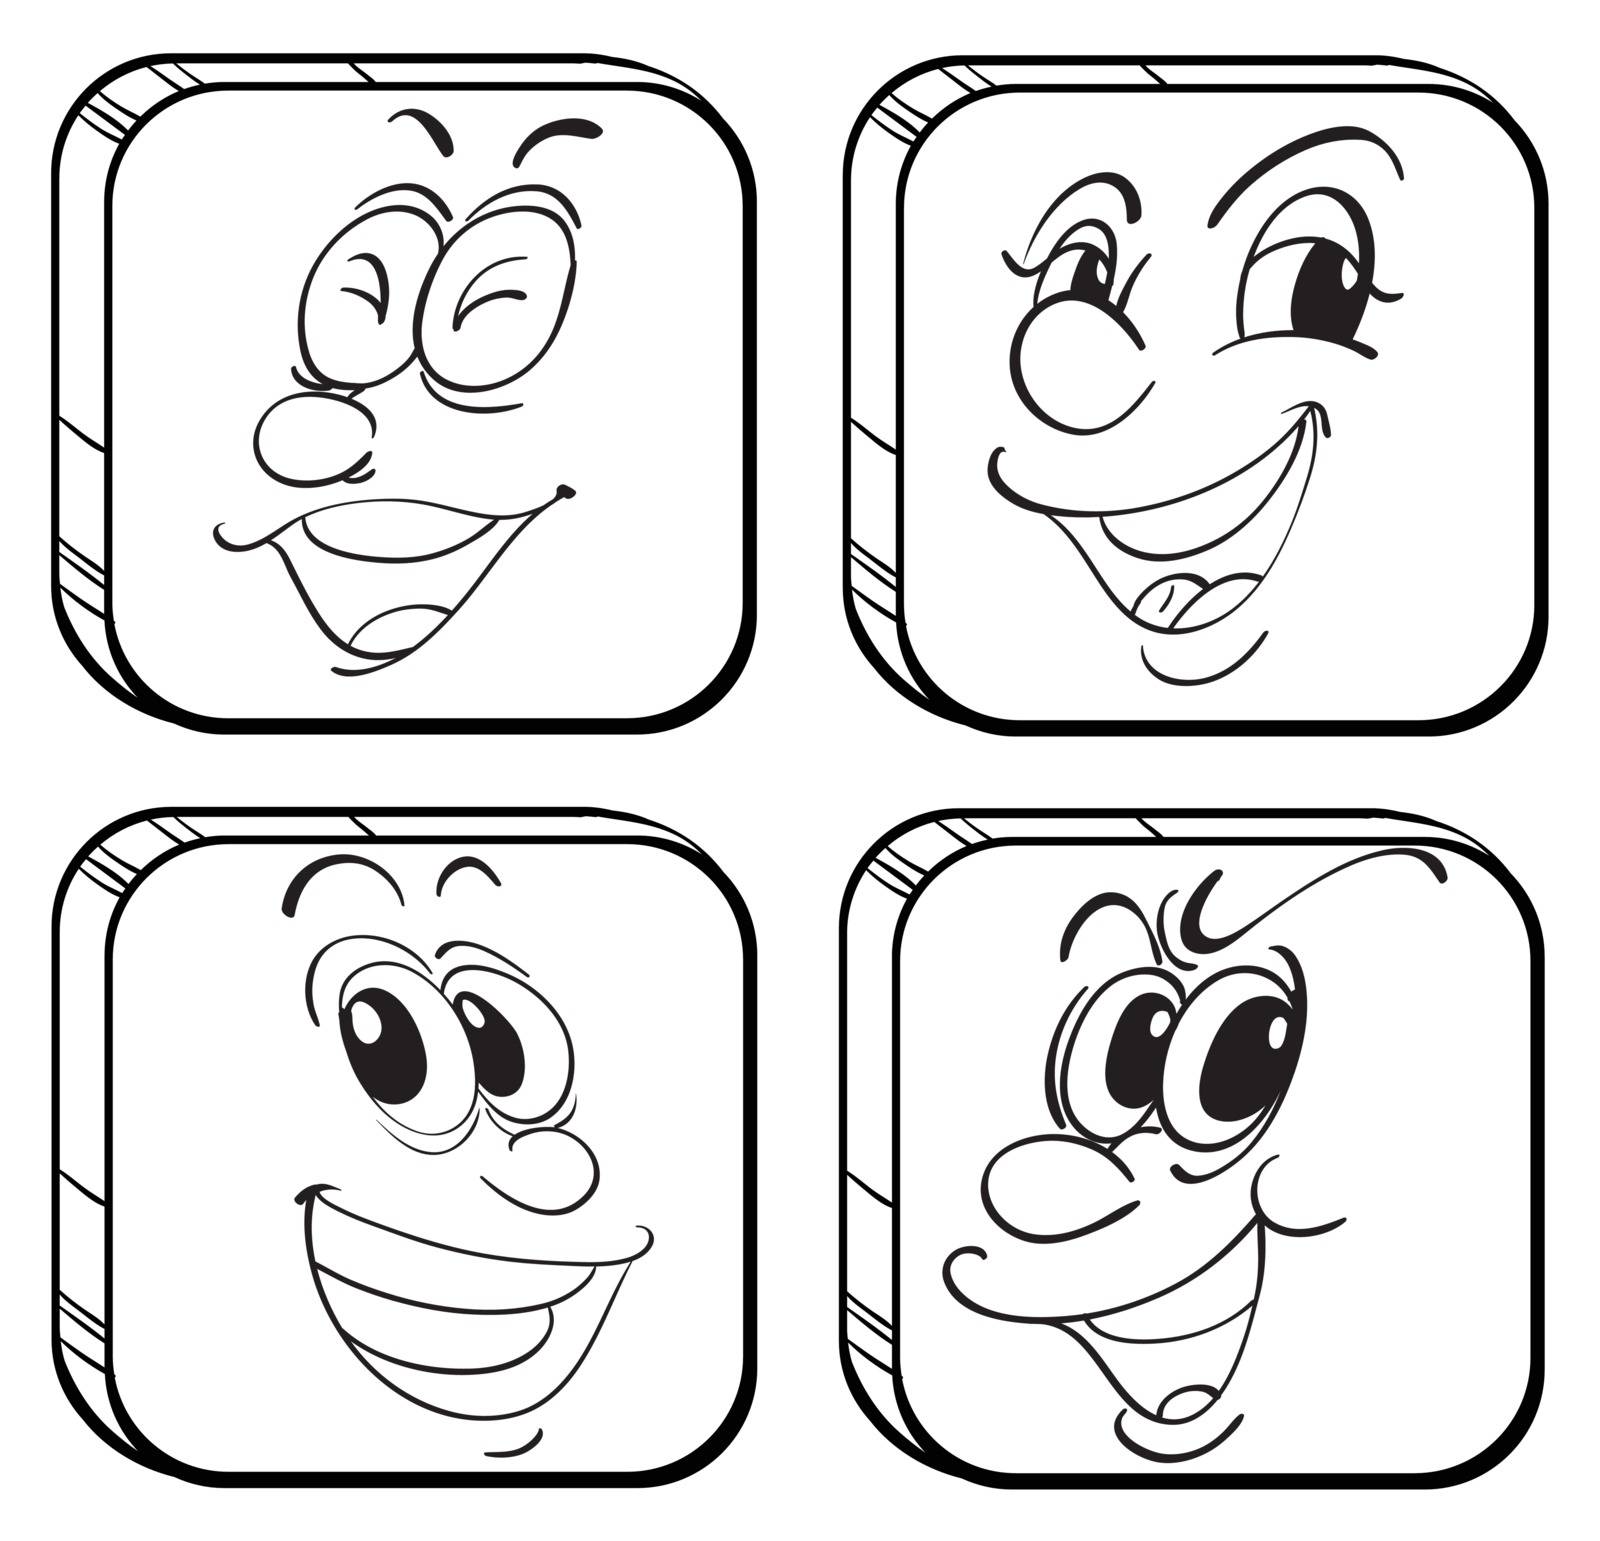 Illustration of the four square faces on a white background